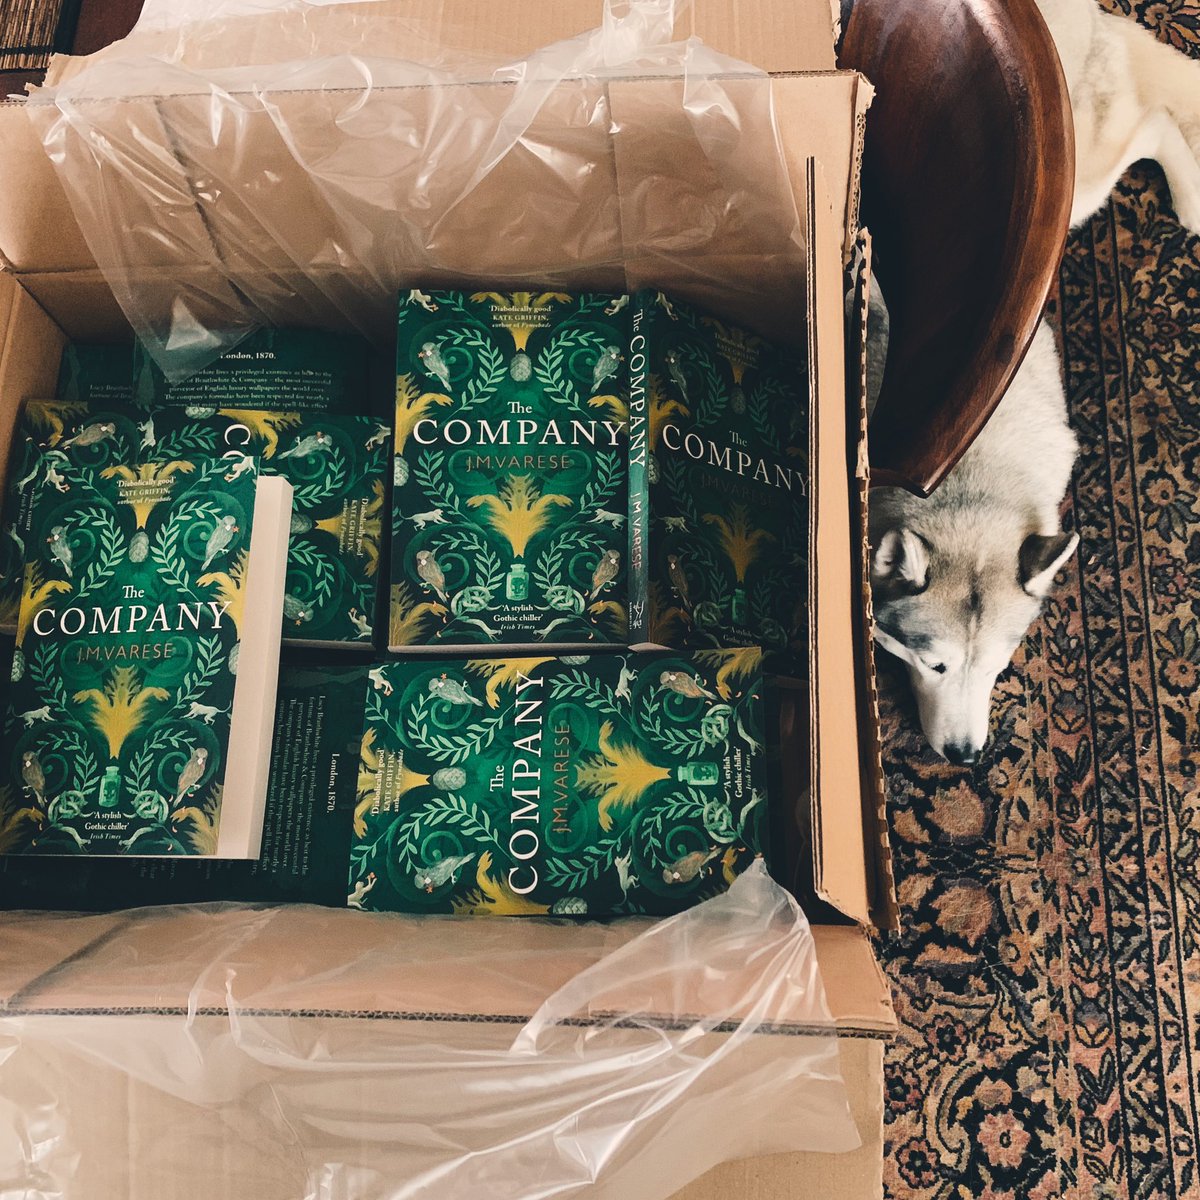 The paperbacks have arrived.

#thecompany #fiction #gothicfiction #gothicthriller #gothic #historicalfiction #historicalthriller #victoriana #arsenic #arsenicscandal #wallpaper #books #booktwitter